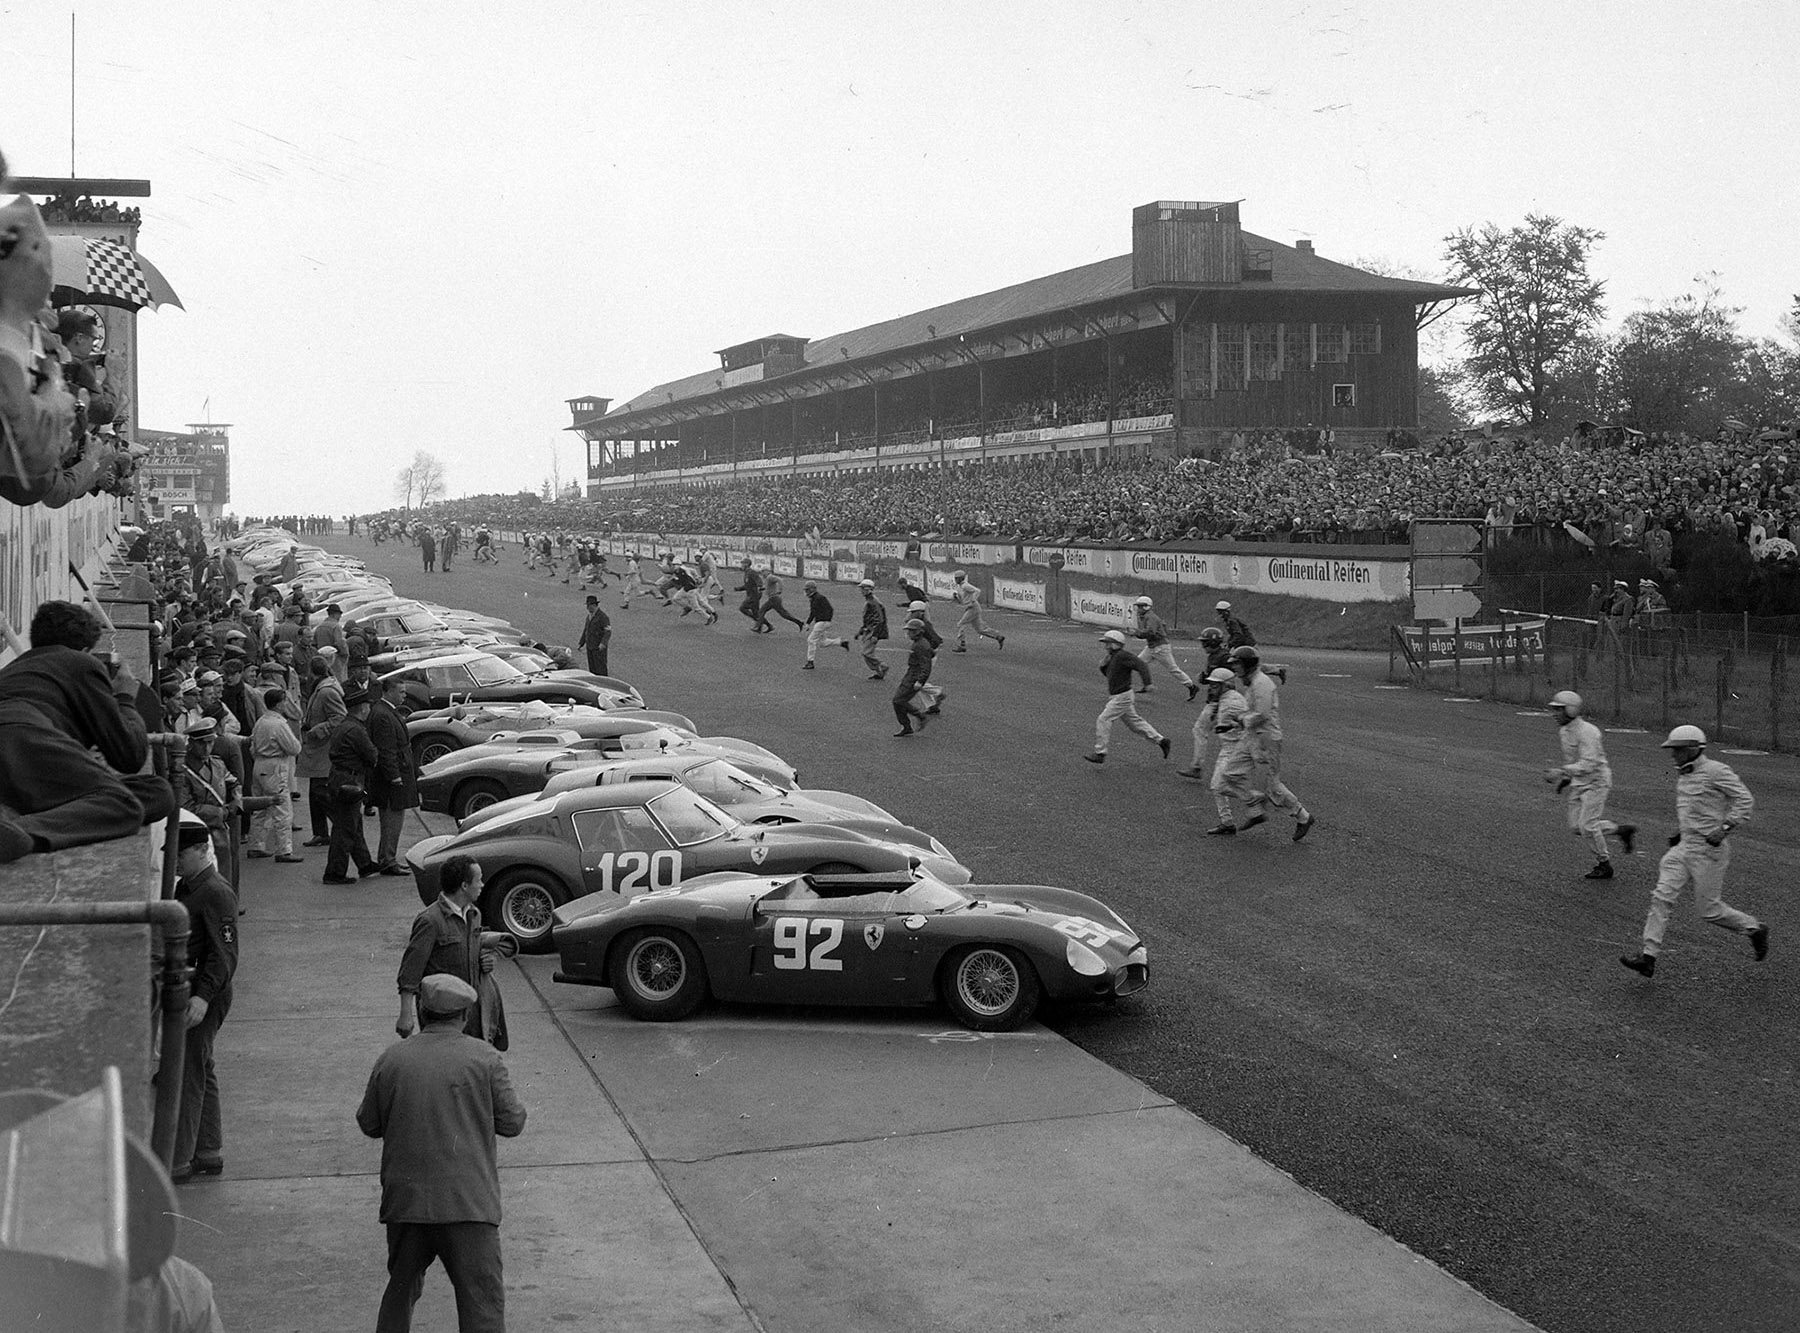 Drivers run to their cars at the start during the Nürburgring 1000 kms at Nürburgring on 27 May 1962. Chassis no. 3765 is the second car in line, race #120.